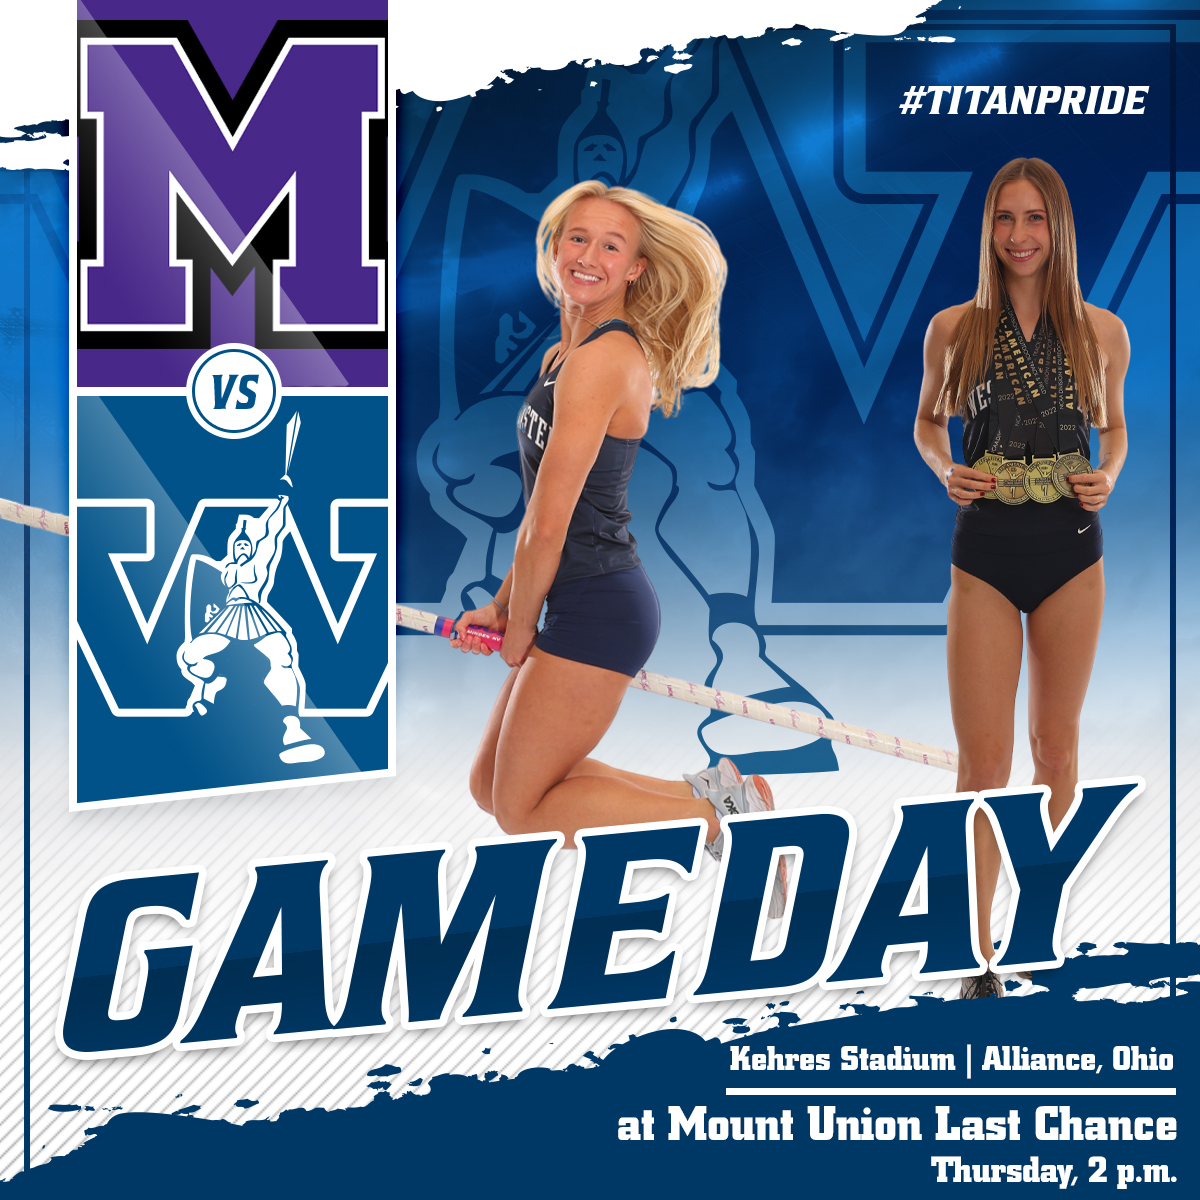 Seniors Madison Conley and Emma Rudolph will compete in the Mount Union Last Chance at Kehres Stadium. Good luck Titans!

🆚Mount Union Last Chance
🕑2 p.m.
📍Alliance, Ohio

#d3tf #pactf #titanpride⚔️